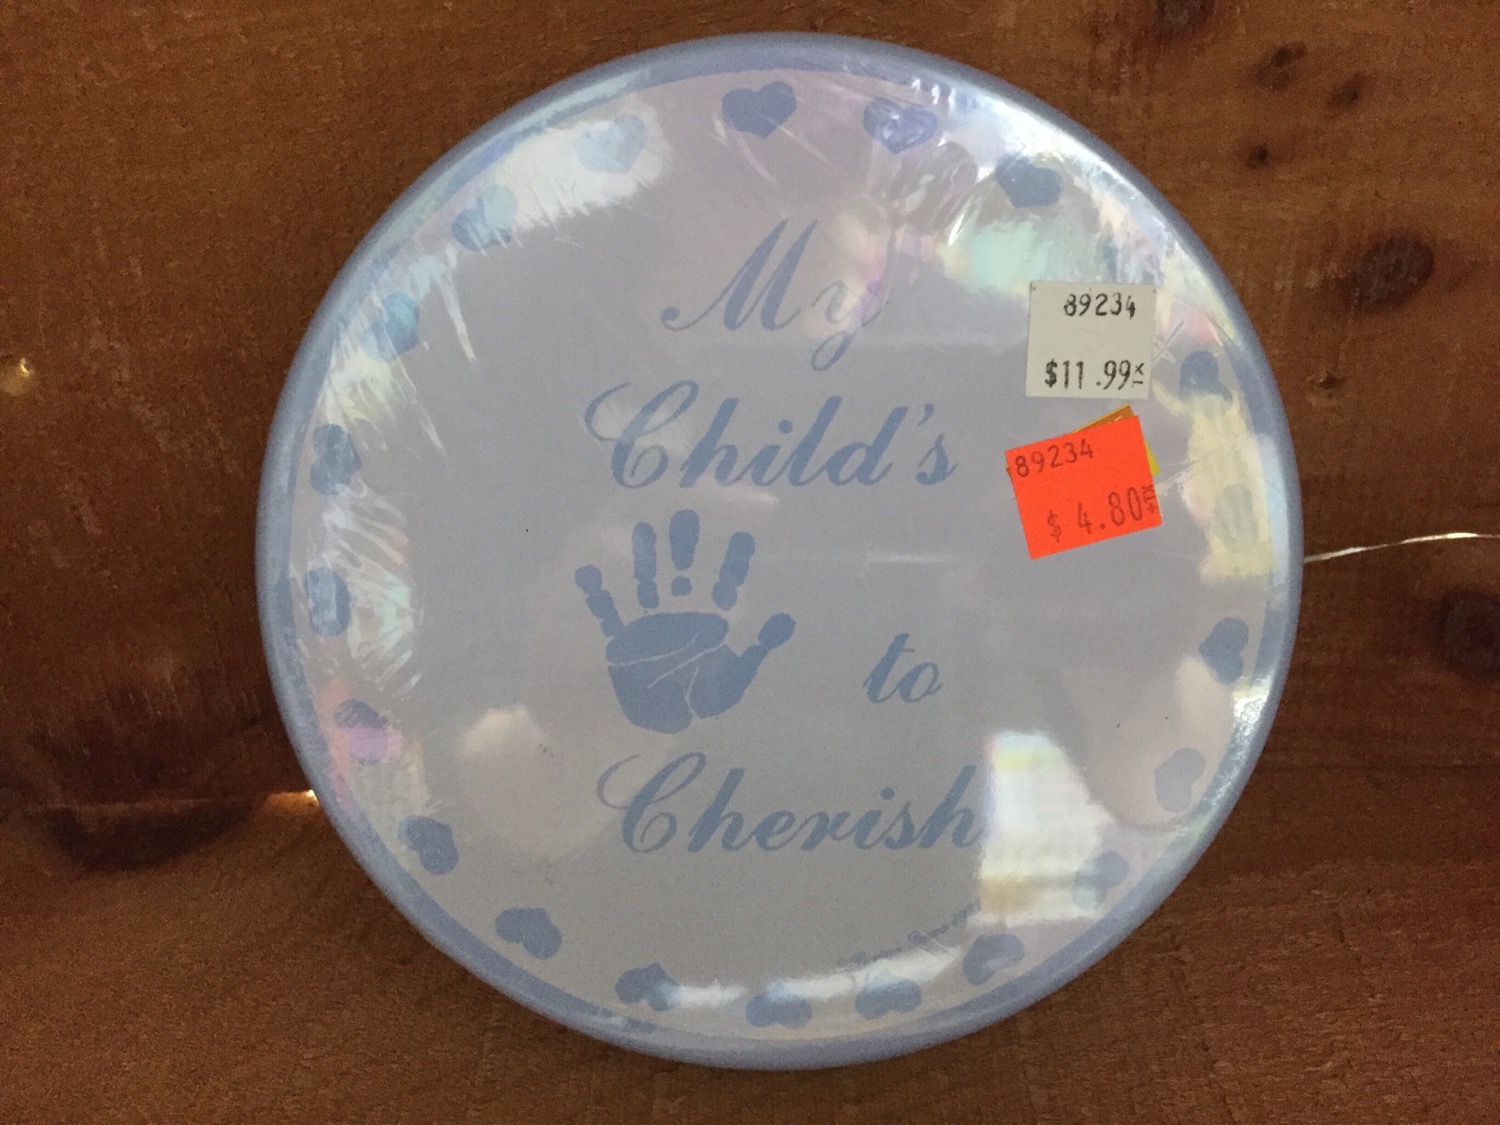 Blue My Child is to Cherish Hand Print Mold Kit by Perine Lowe Inc